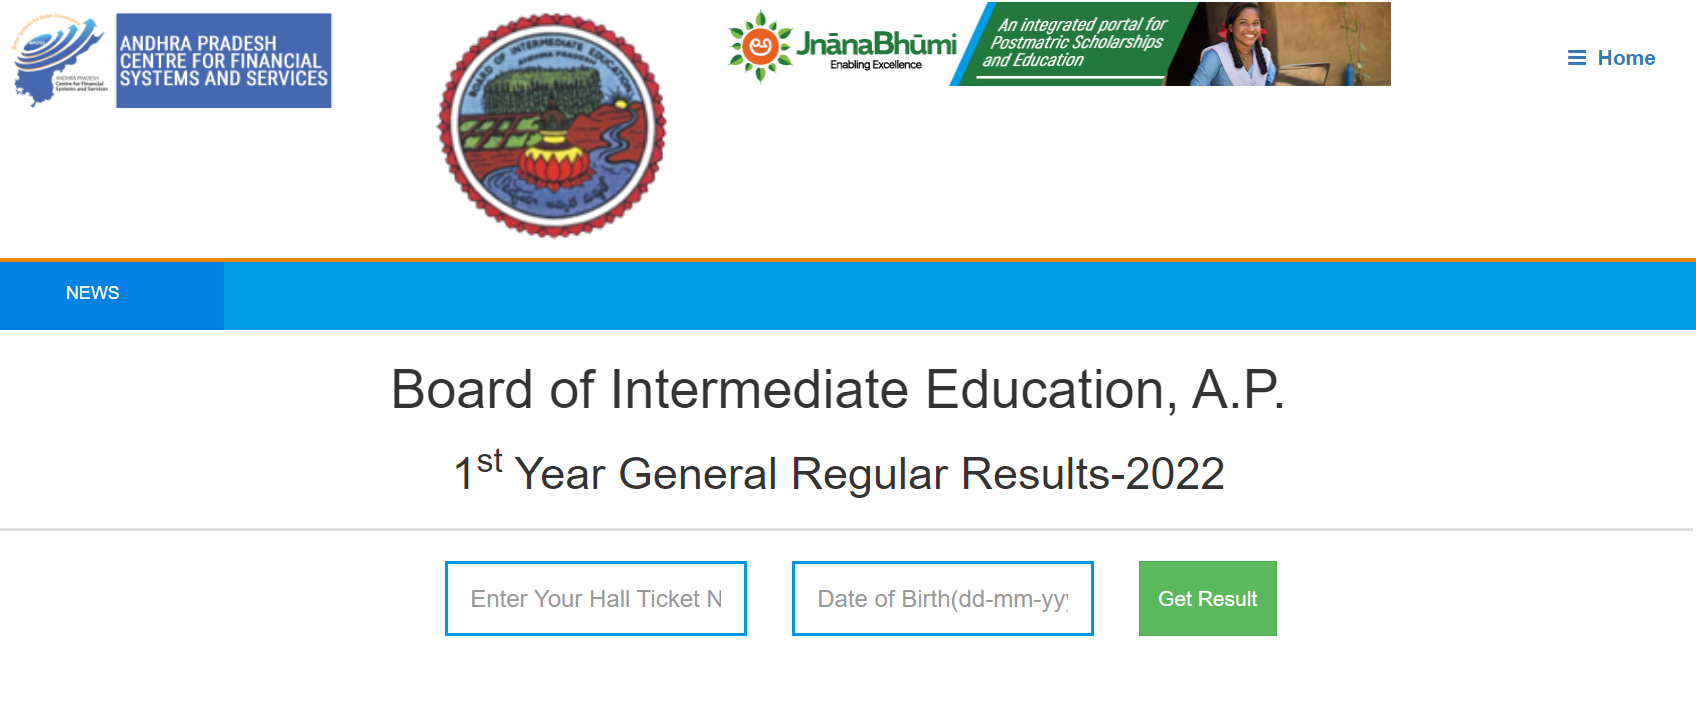 Andhra Pradesh Intermediate Class 11 and 12 Result 2022 Declared|Check Details